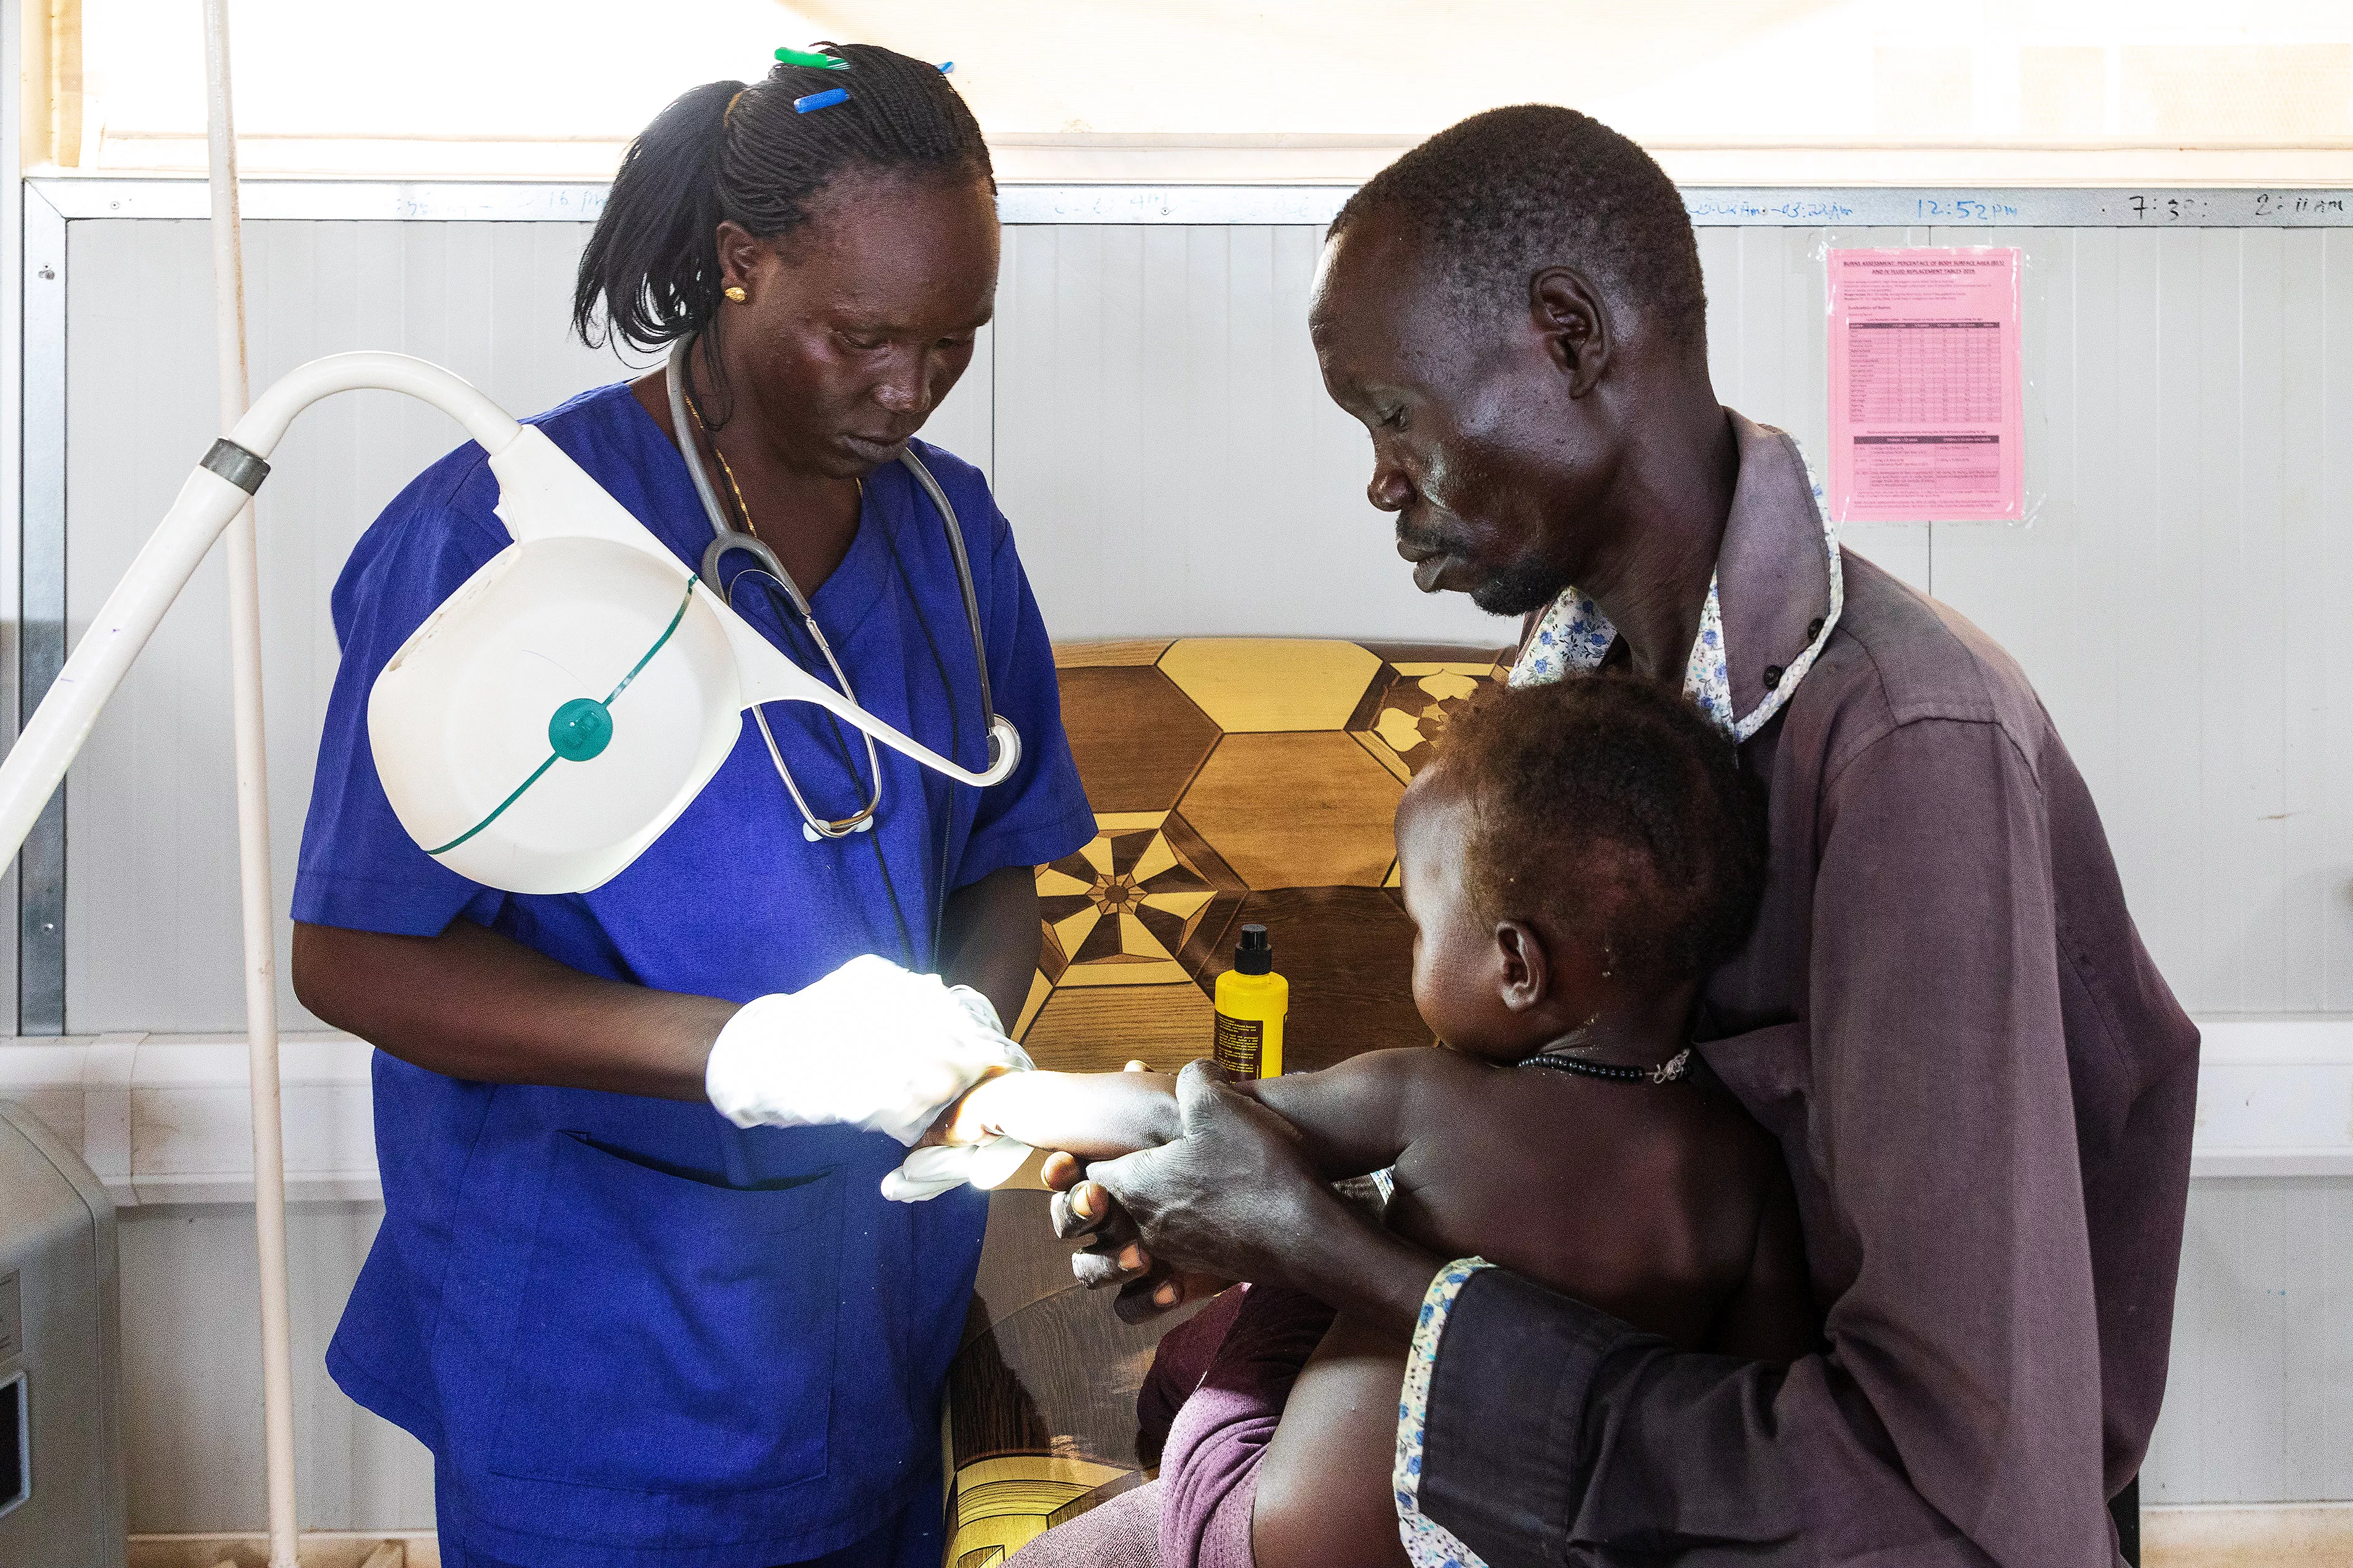 The MSF hospital in Agok is the only facility providing secondary care in the entire Abyei region of South Sudan. This structure deals with emergencies, surgeries, treatments of HIV, tuberculosis, chronic diseases as well as neglected diseases, such as snake bites, a real scourge in the region.